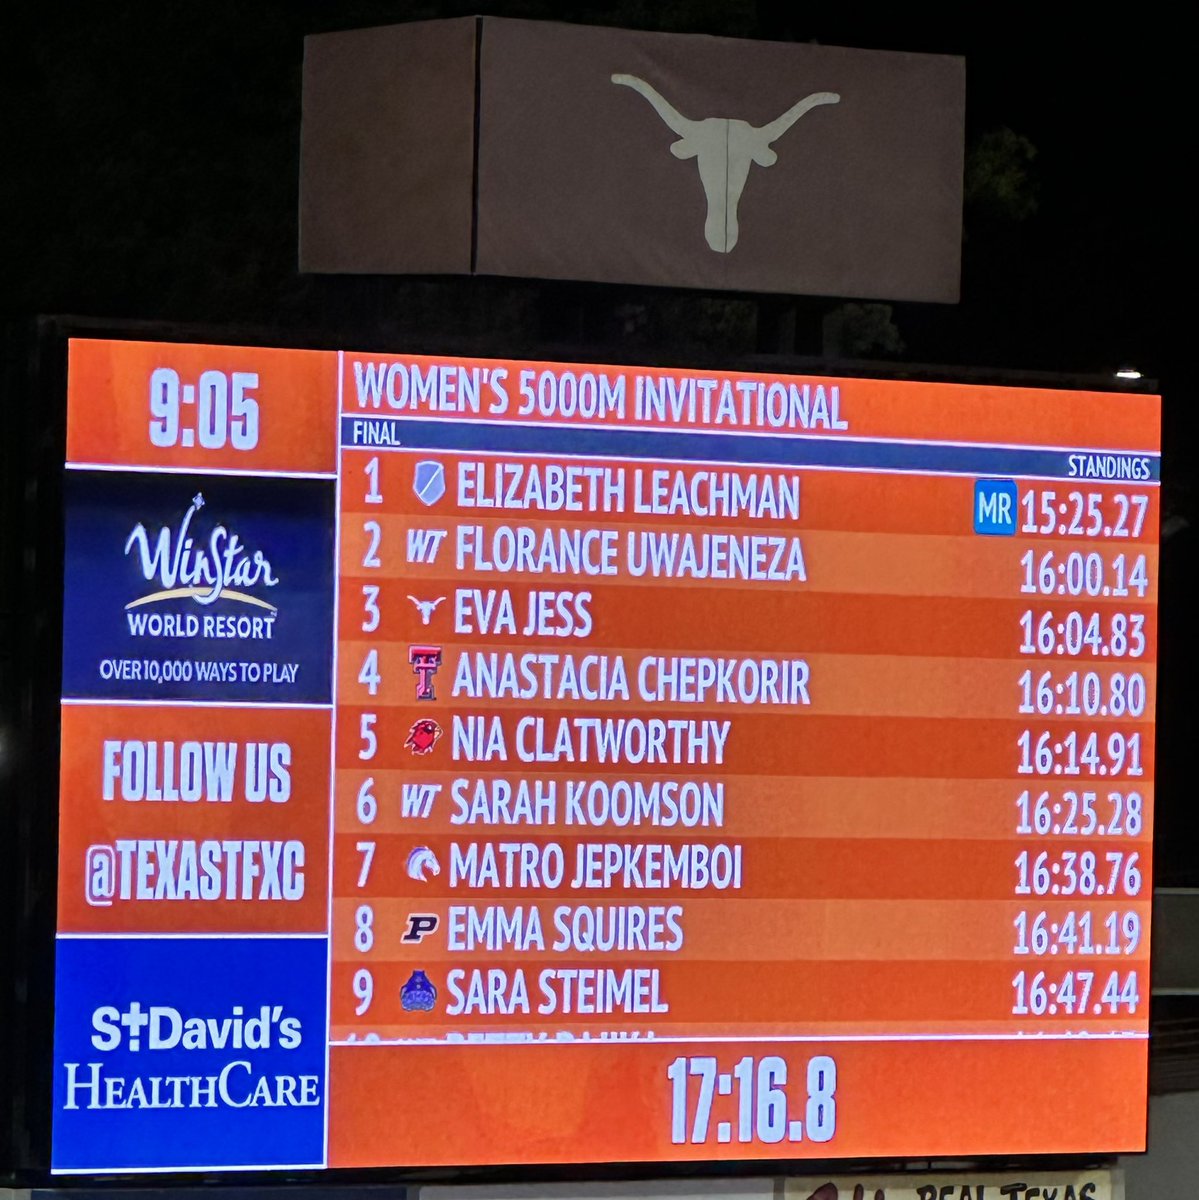 New National Record for Elizabeth Leachman 15:25.27 previously held by Natalie Cook 15:25.93.